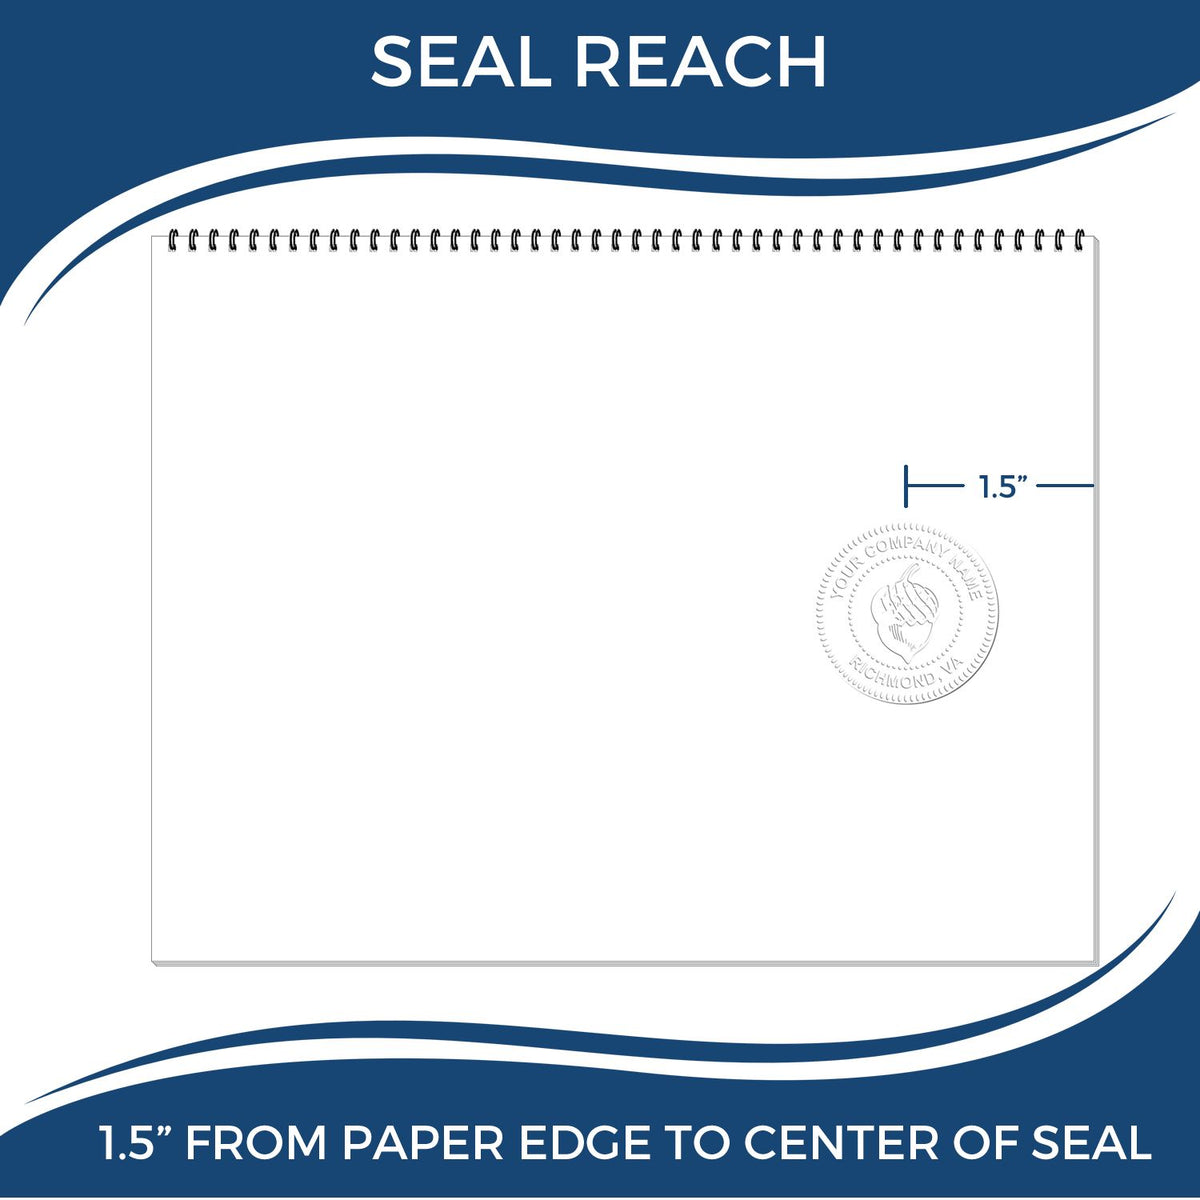 An infographic showing the seal reach which is represented by a ruler and a miniature seal image of the Alaska Engineer Desk Seal